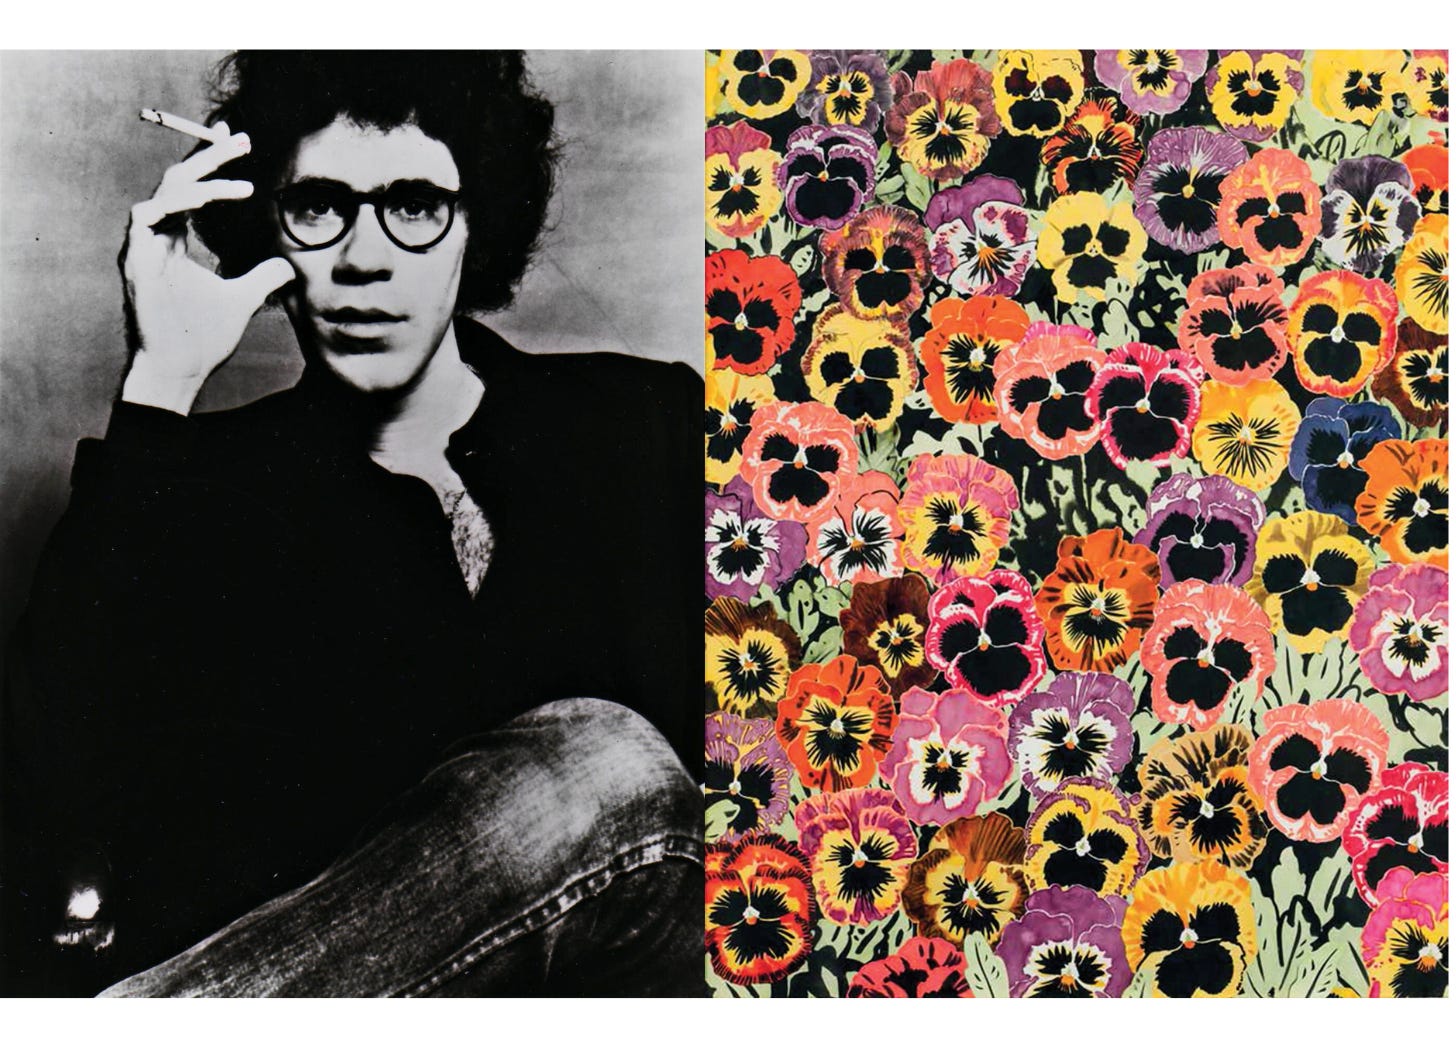 Black and white portrait of artist Joe Brainard beside his notable watercolor and collage painting, Pansies (1968). 